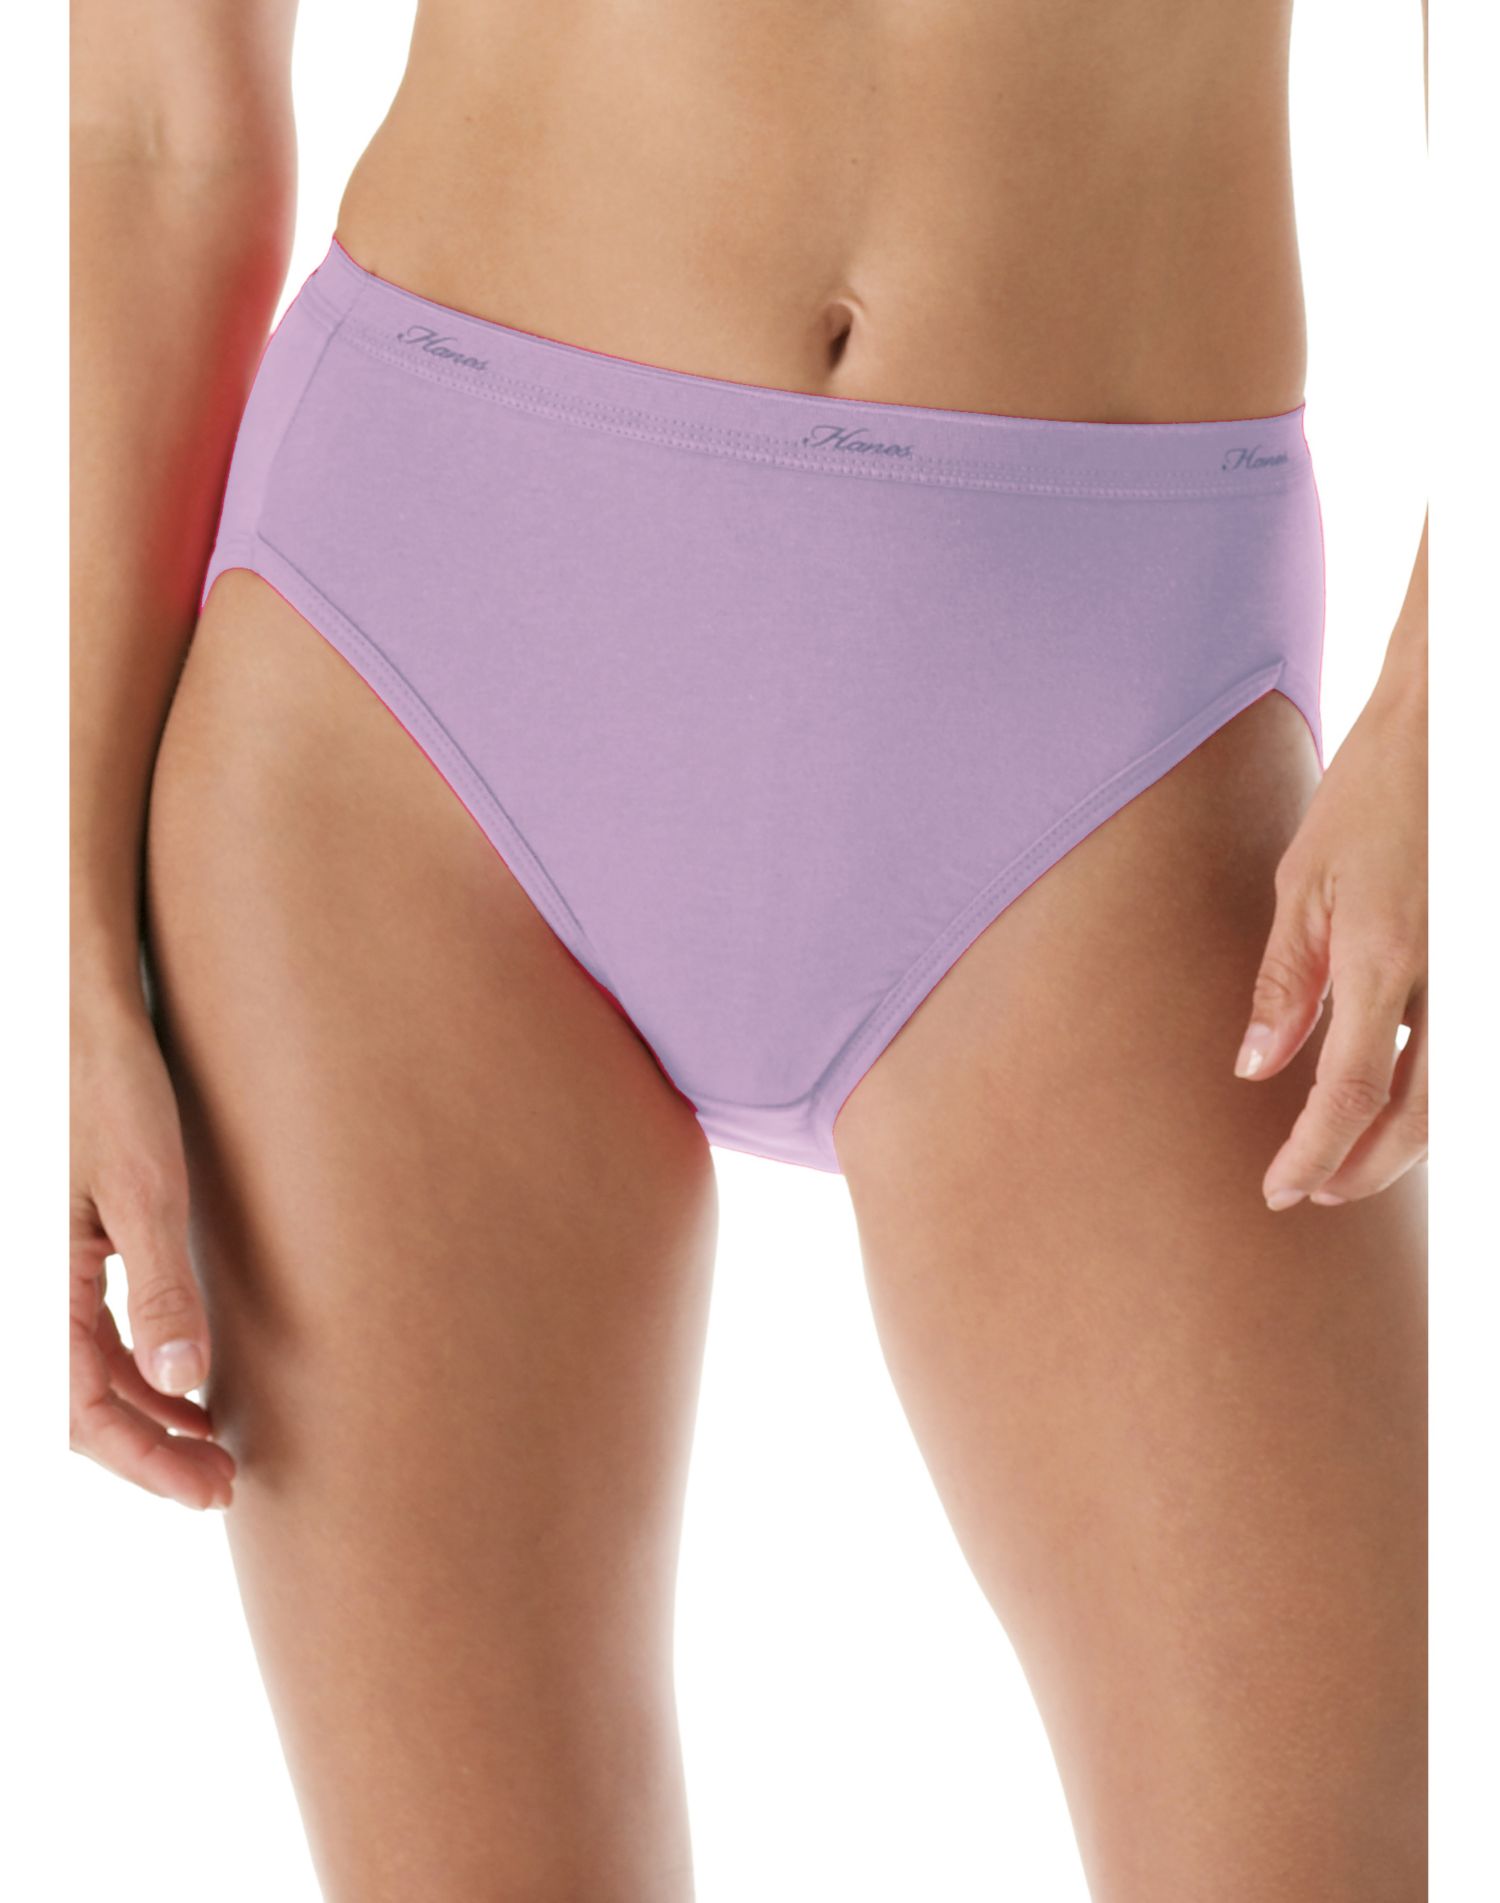 Hanes Women's 6-Pk. Cotton Sporty Hipster Underwear With Cool Comfort